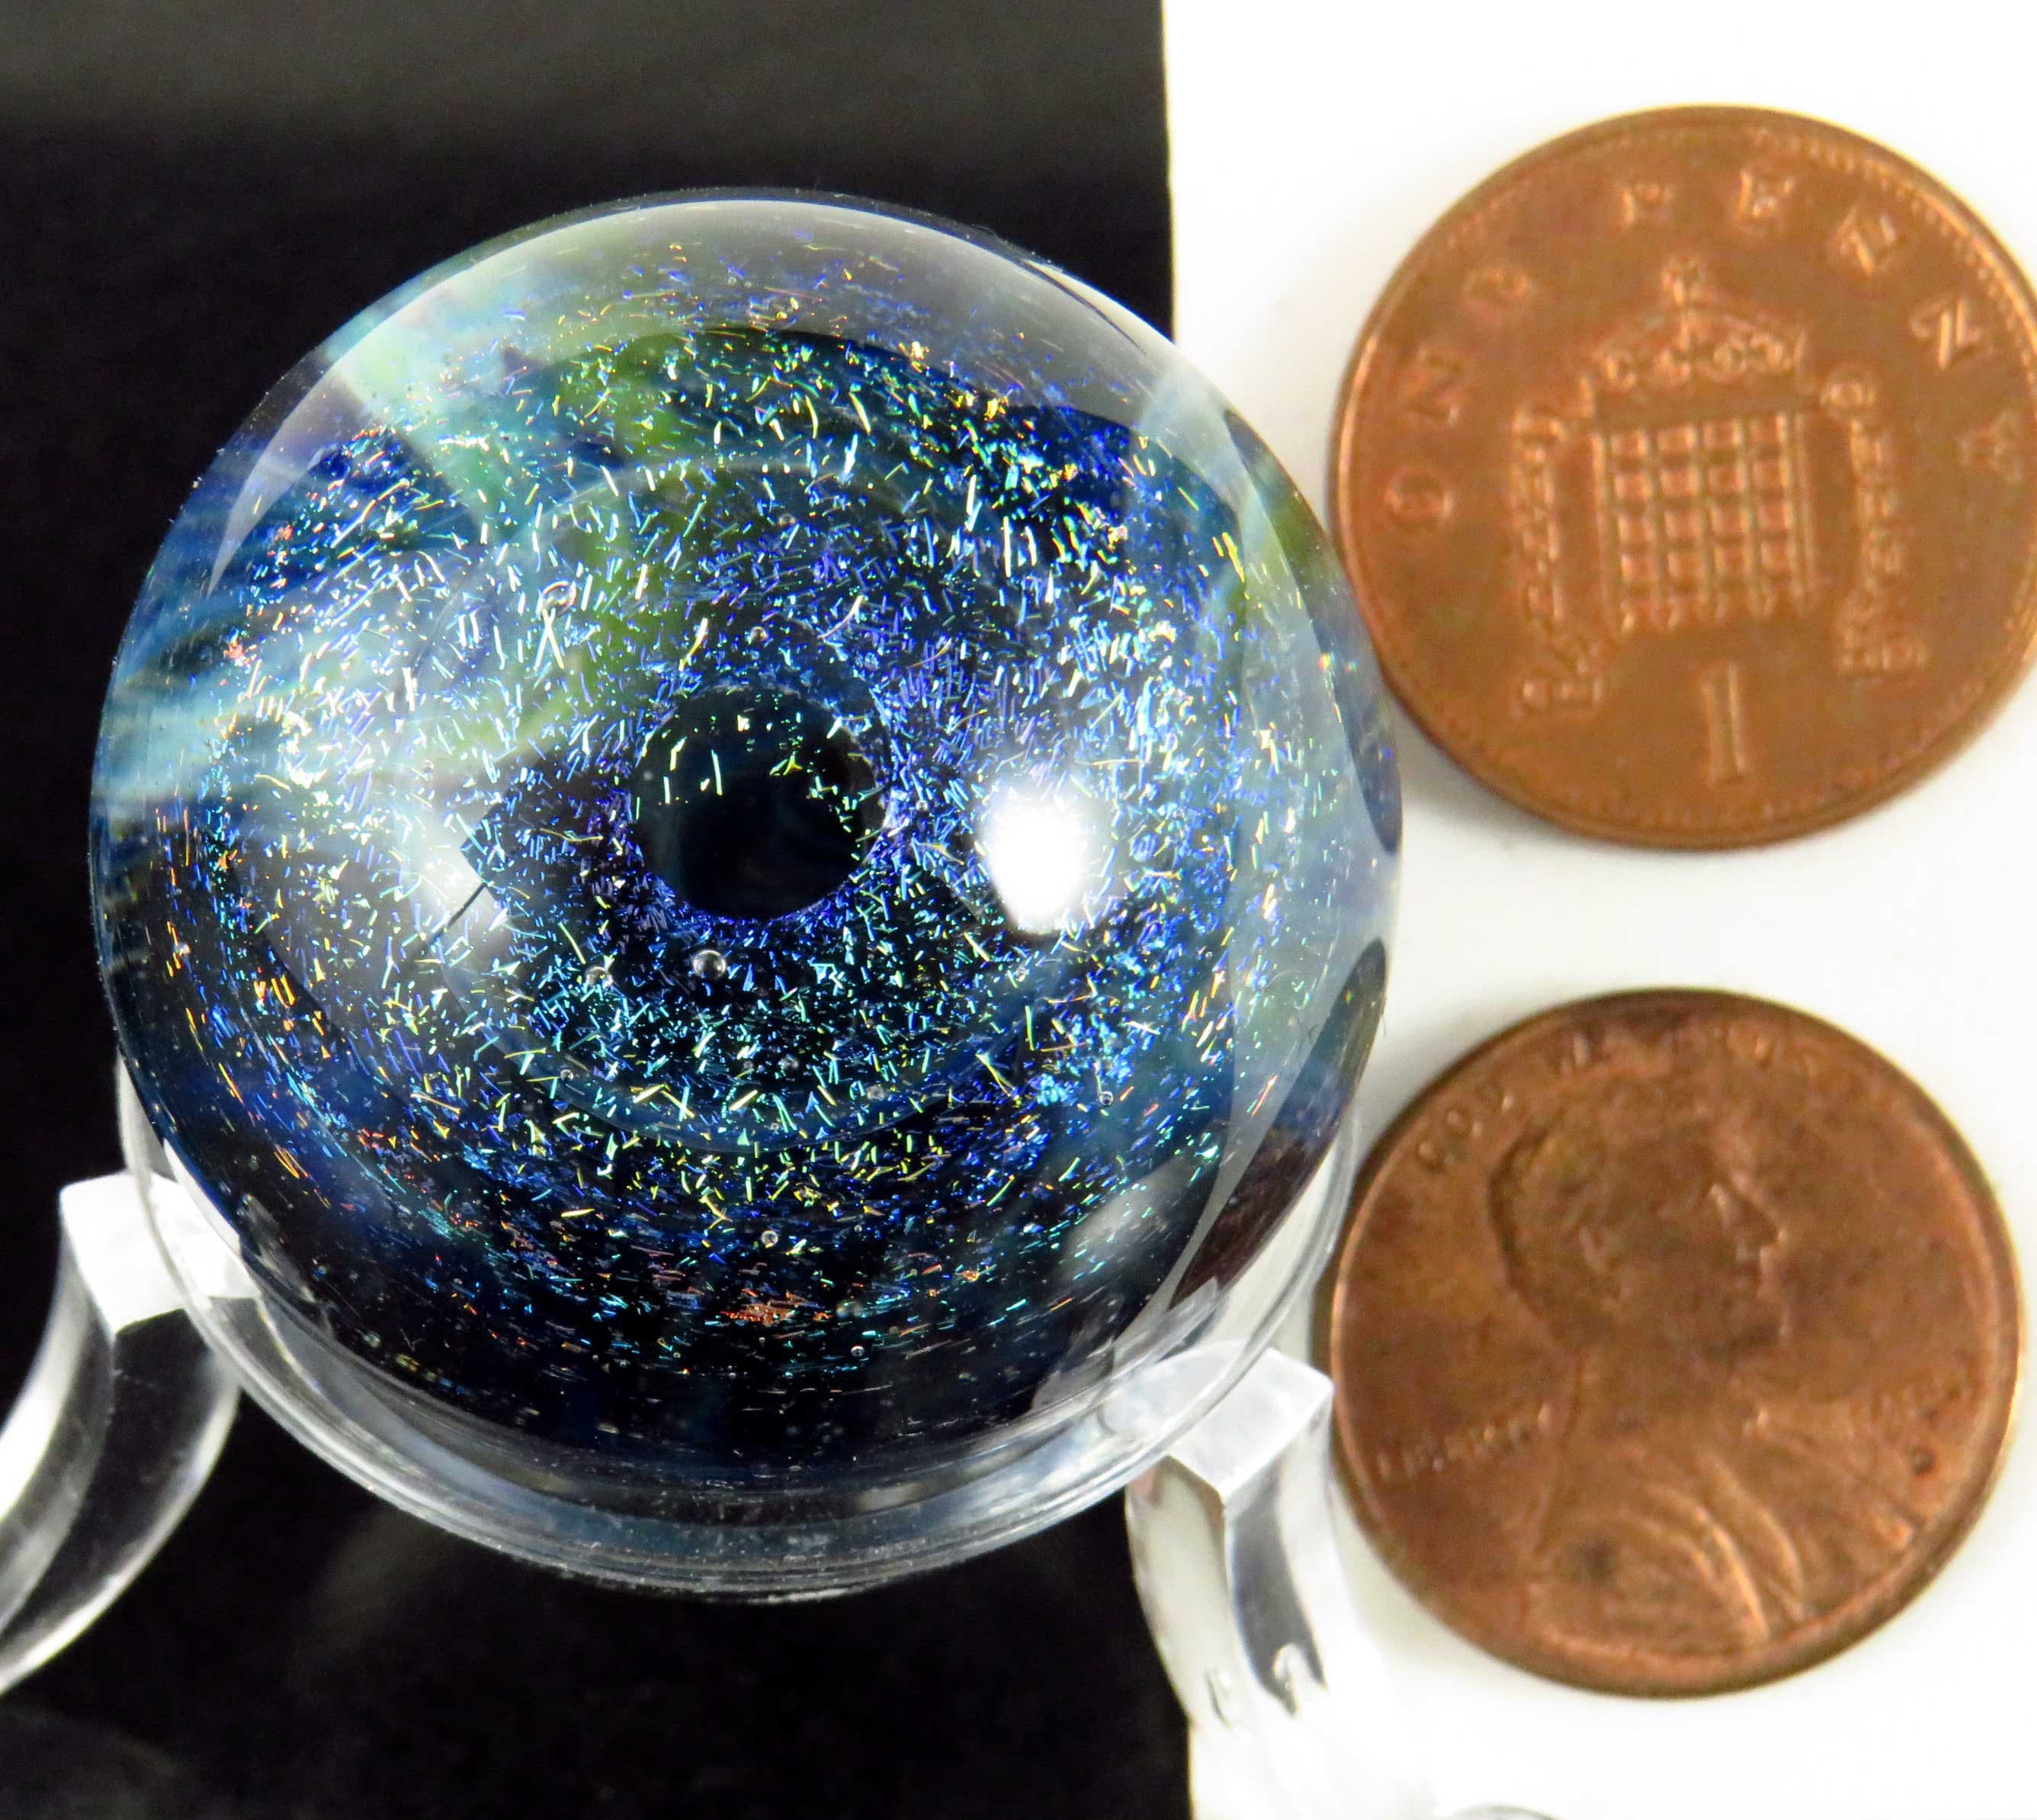 Intense purple to blue spiral galaxy marble space marble astronomy gifts collectable handmade space art